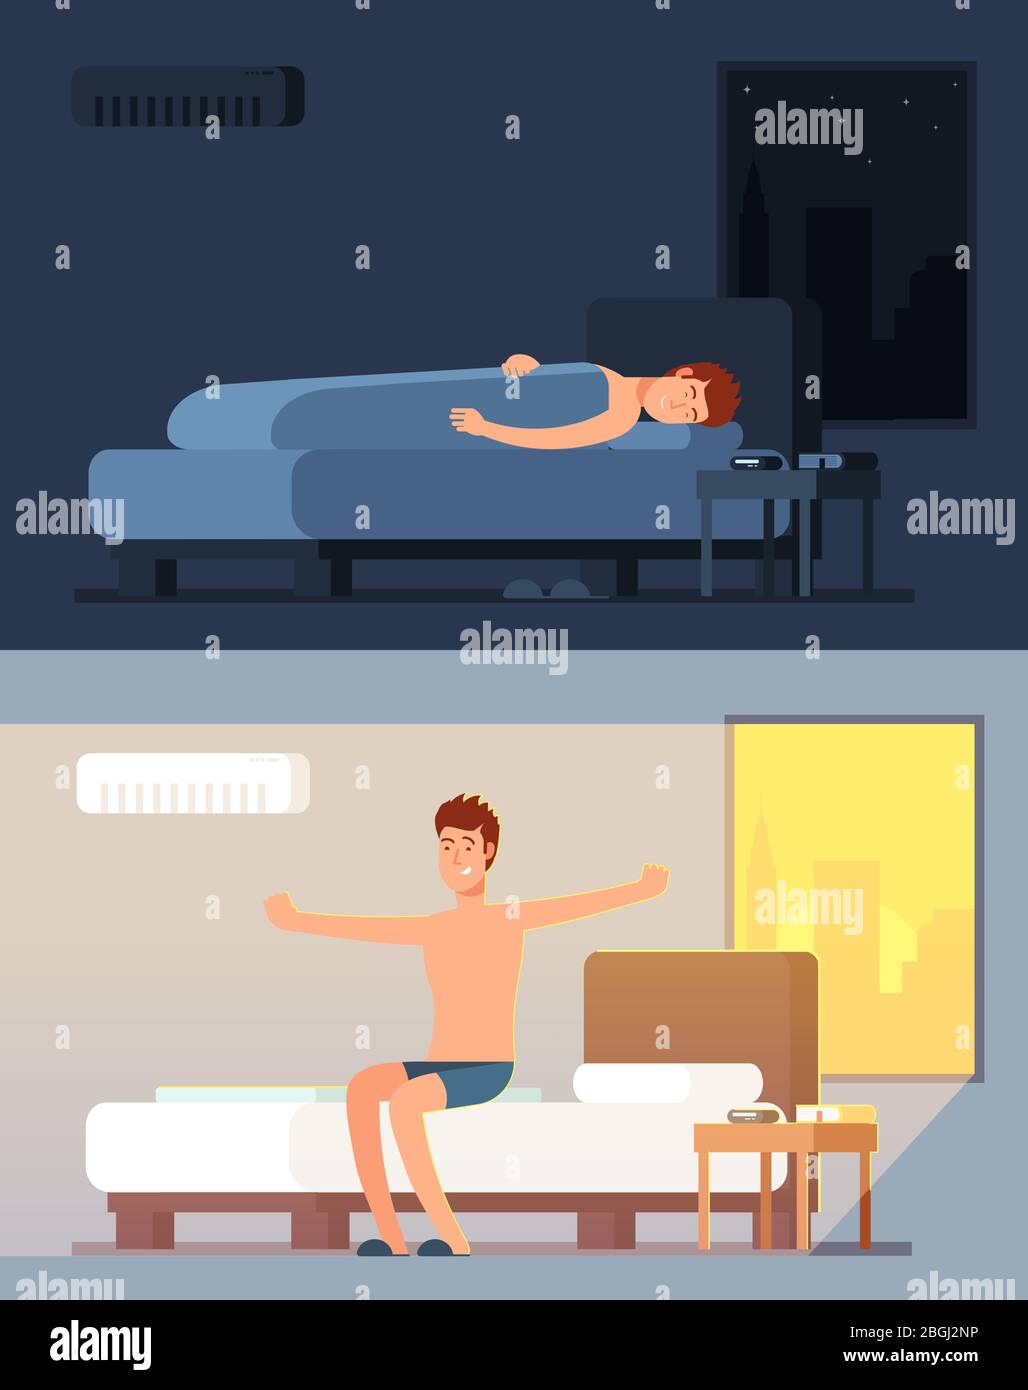 Man peacefully sleeping and dreaming in comfy bed at night and peppy waking up in morning cartoon vector concept. Illustration of night and morning bedroom Stock Vector